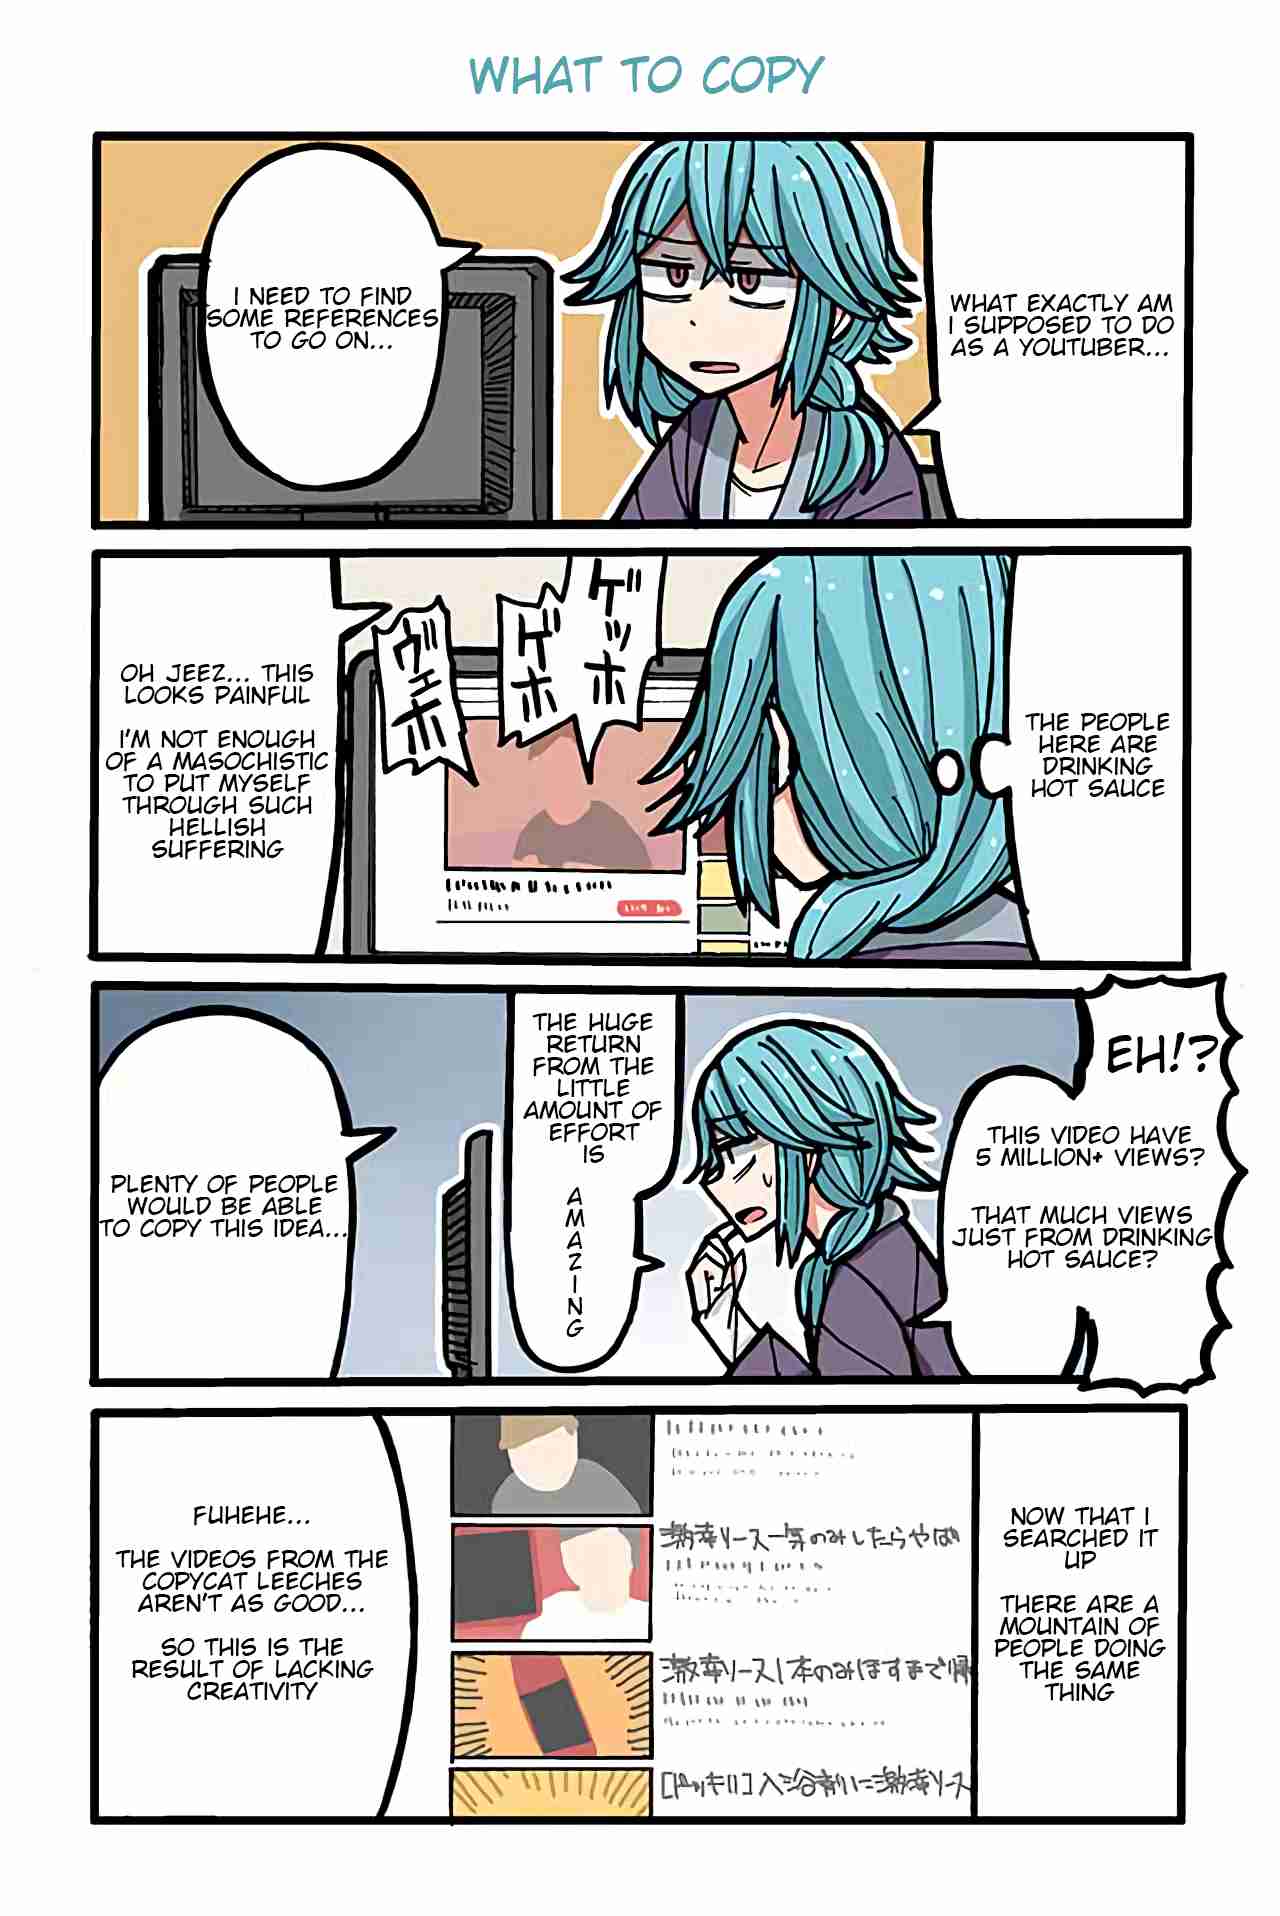 Lazy Idol Yamada's Life as a Youtuber Ch. 4 What to Copy